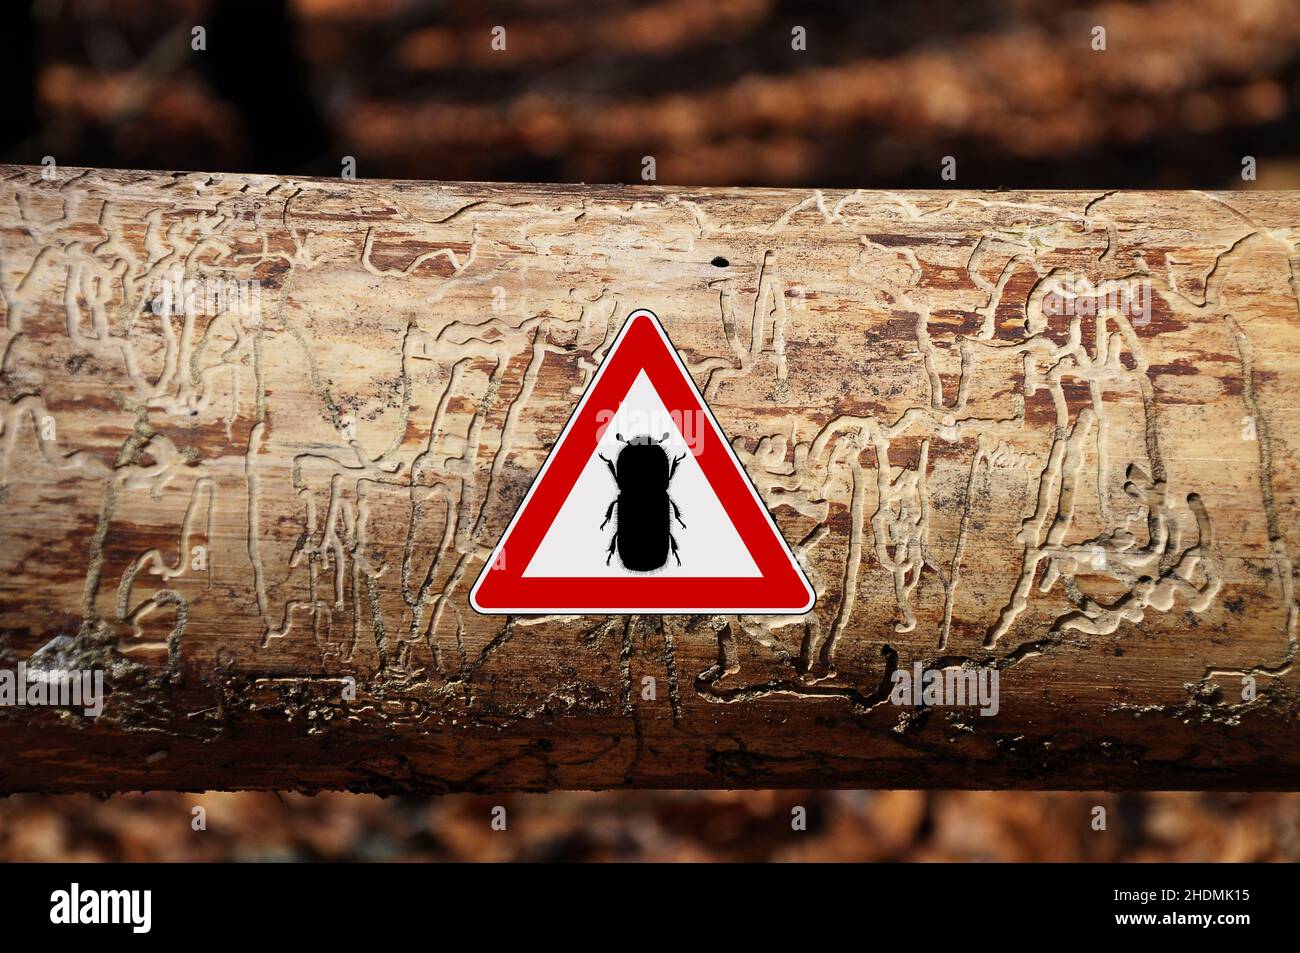 wood, groove, infestation, woodland, woodlands, woods, grooves, infestations Stock Photo